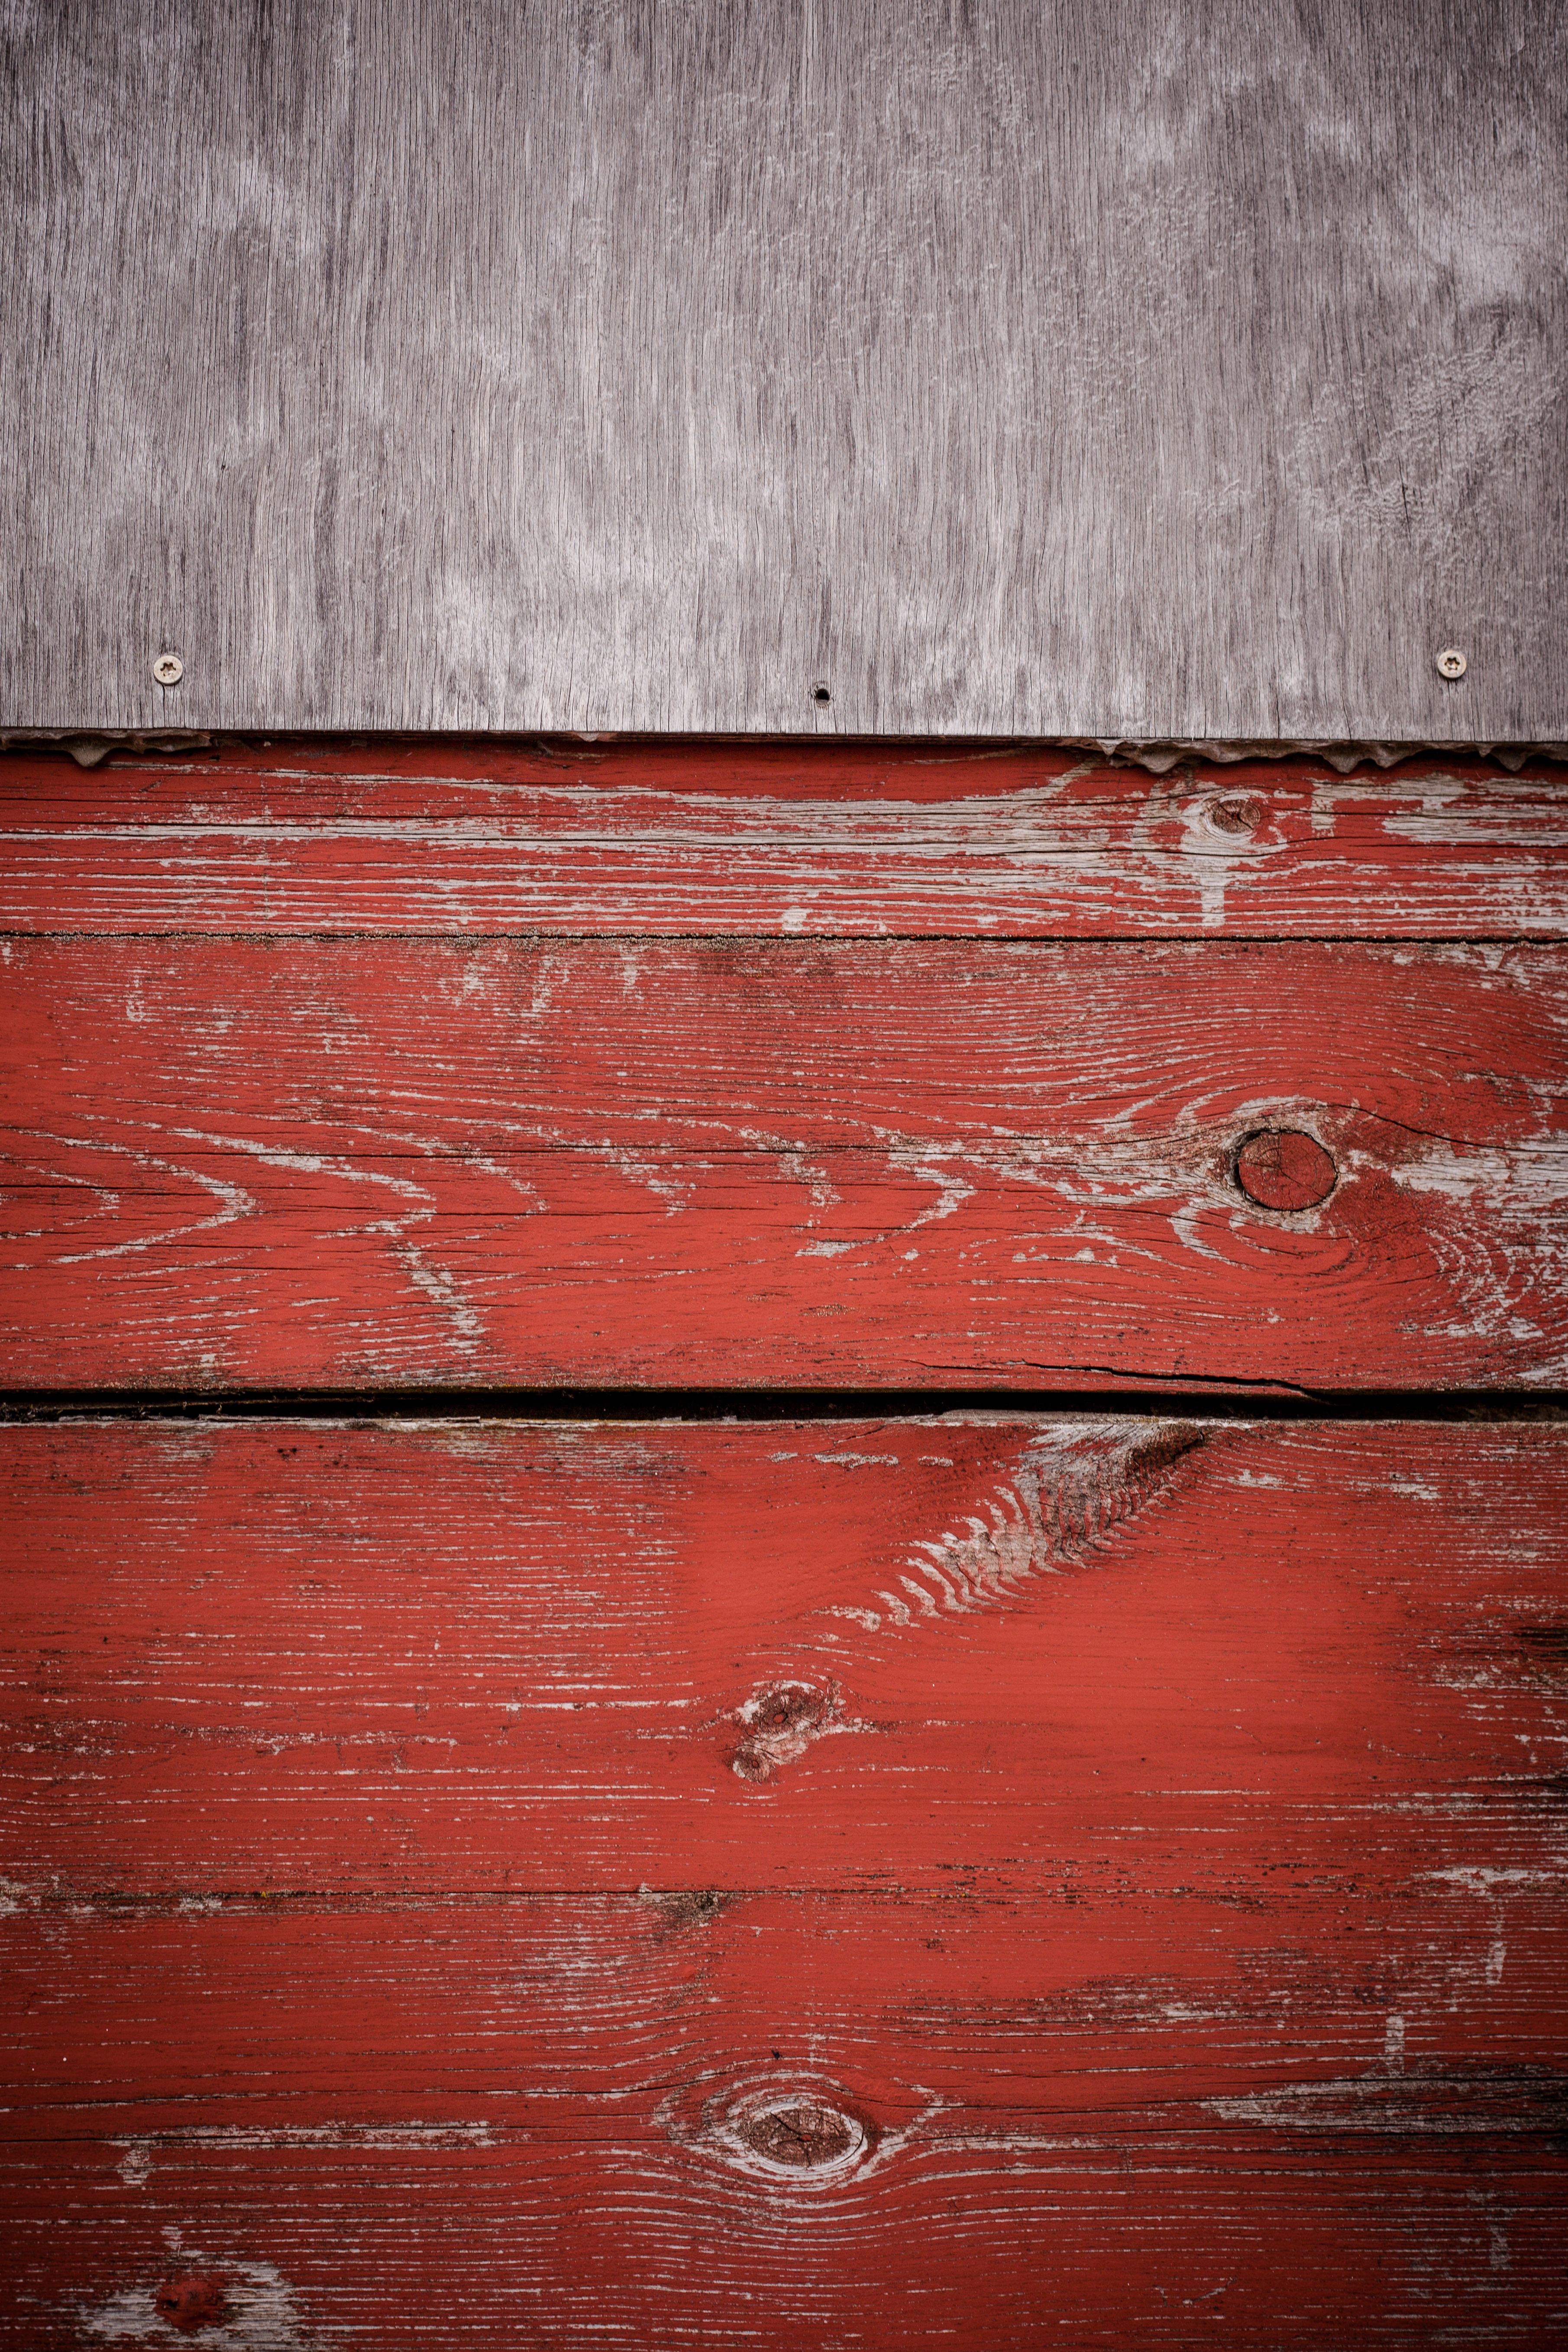 Grungy red wood texture photo